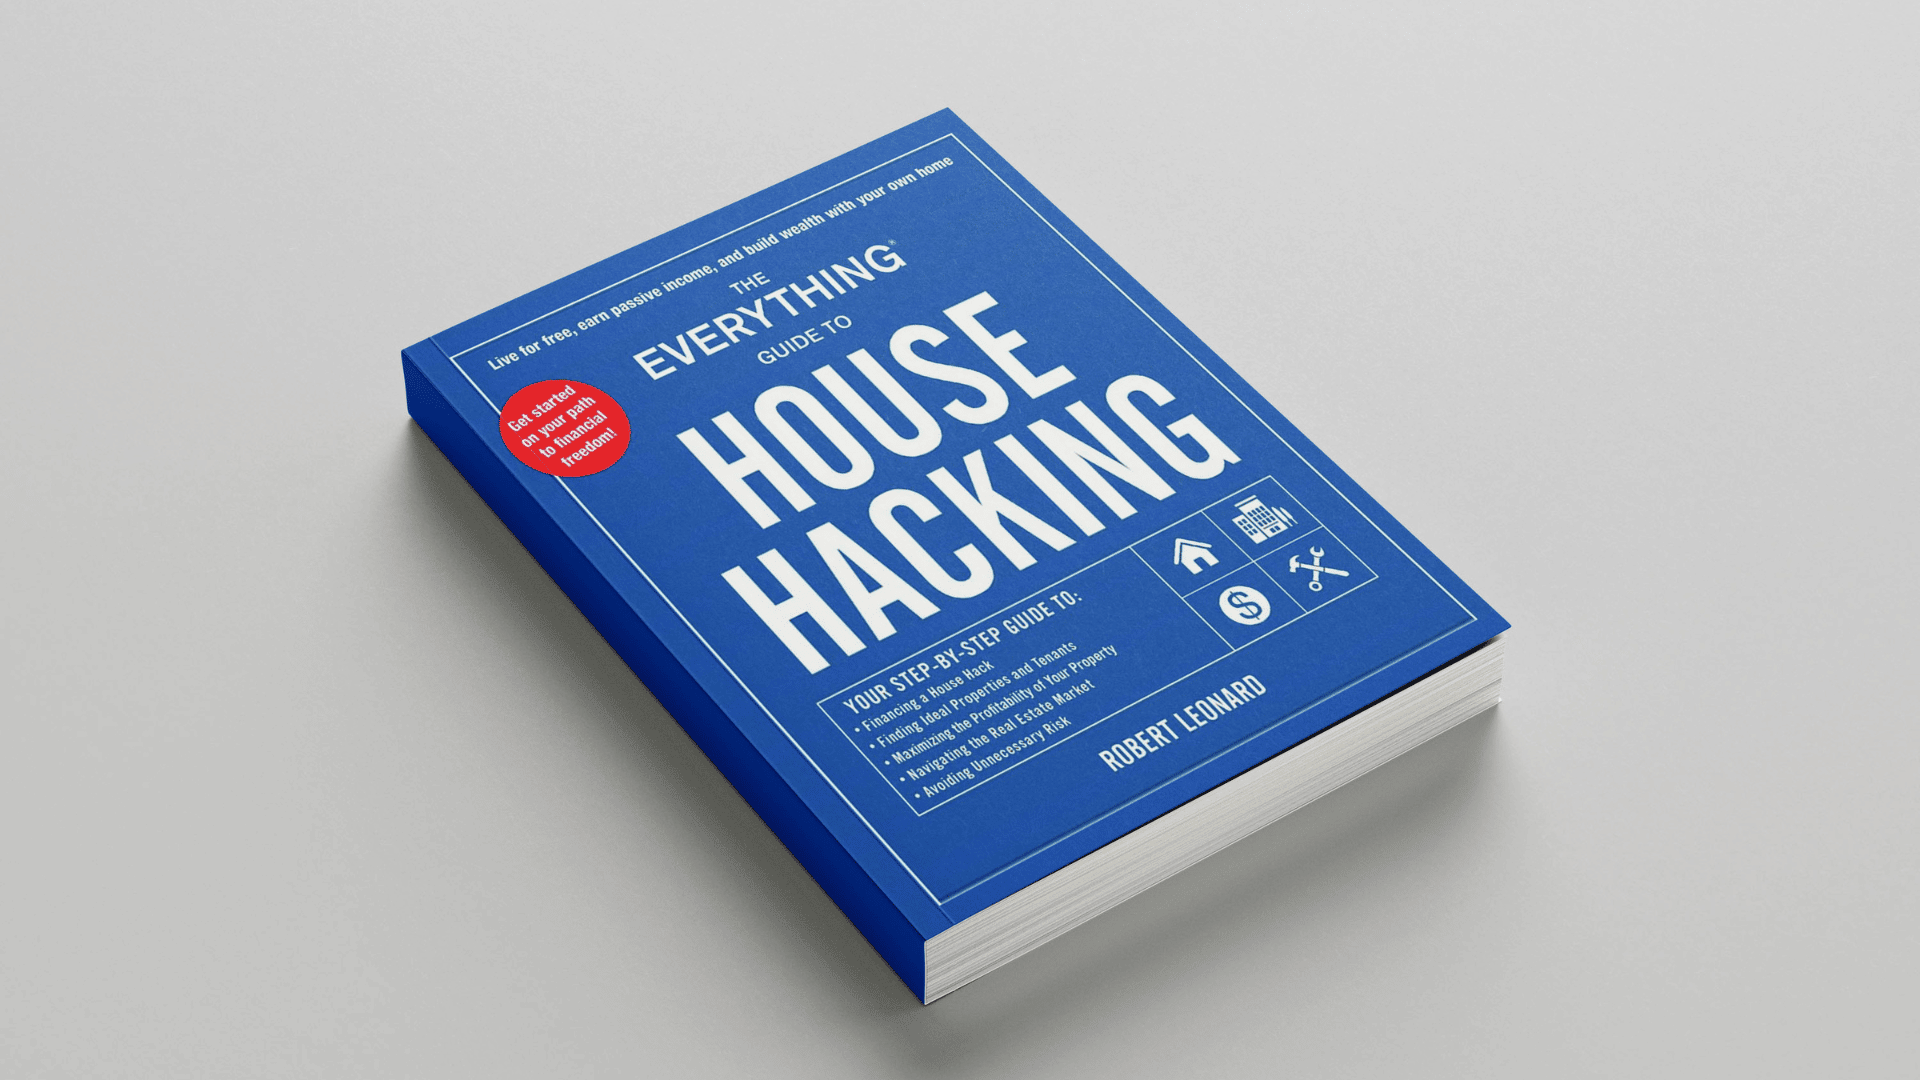 Everything Guide to House Hacking book